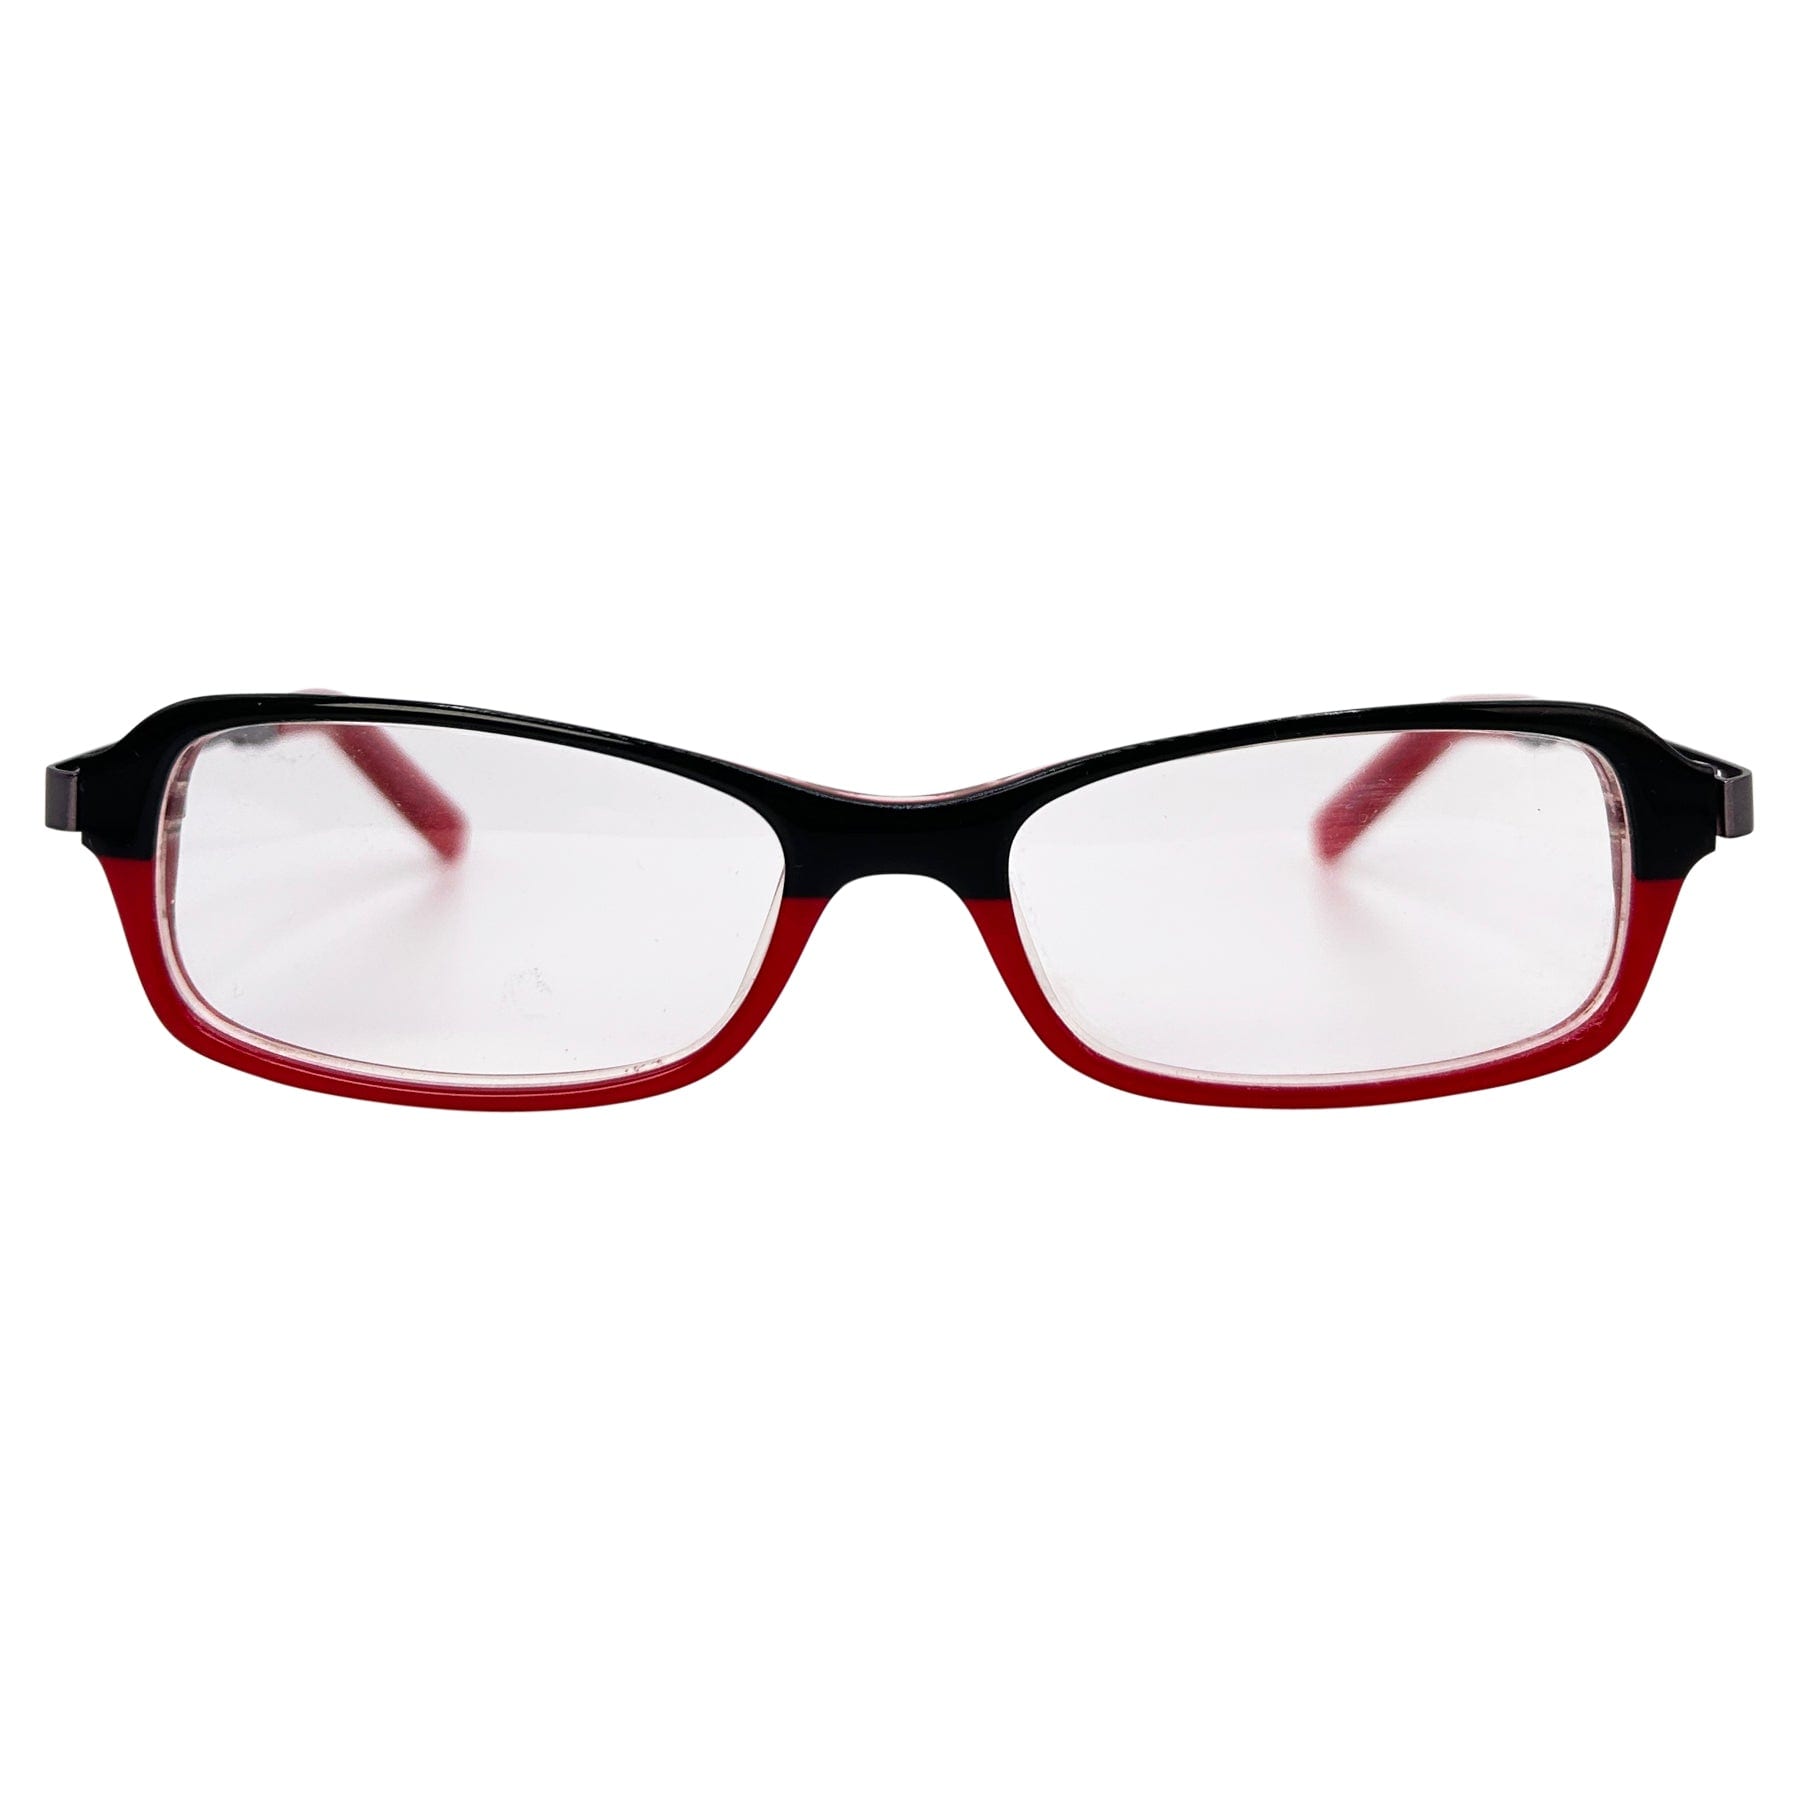 black and red clear square glasses with a 90 style frame